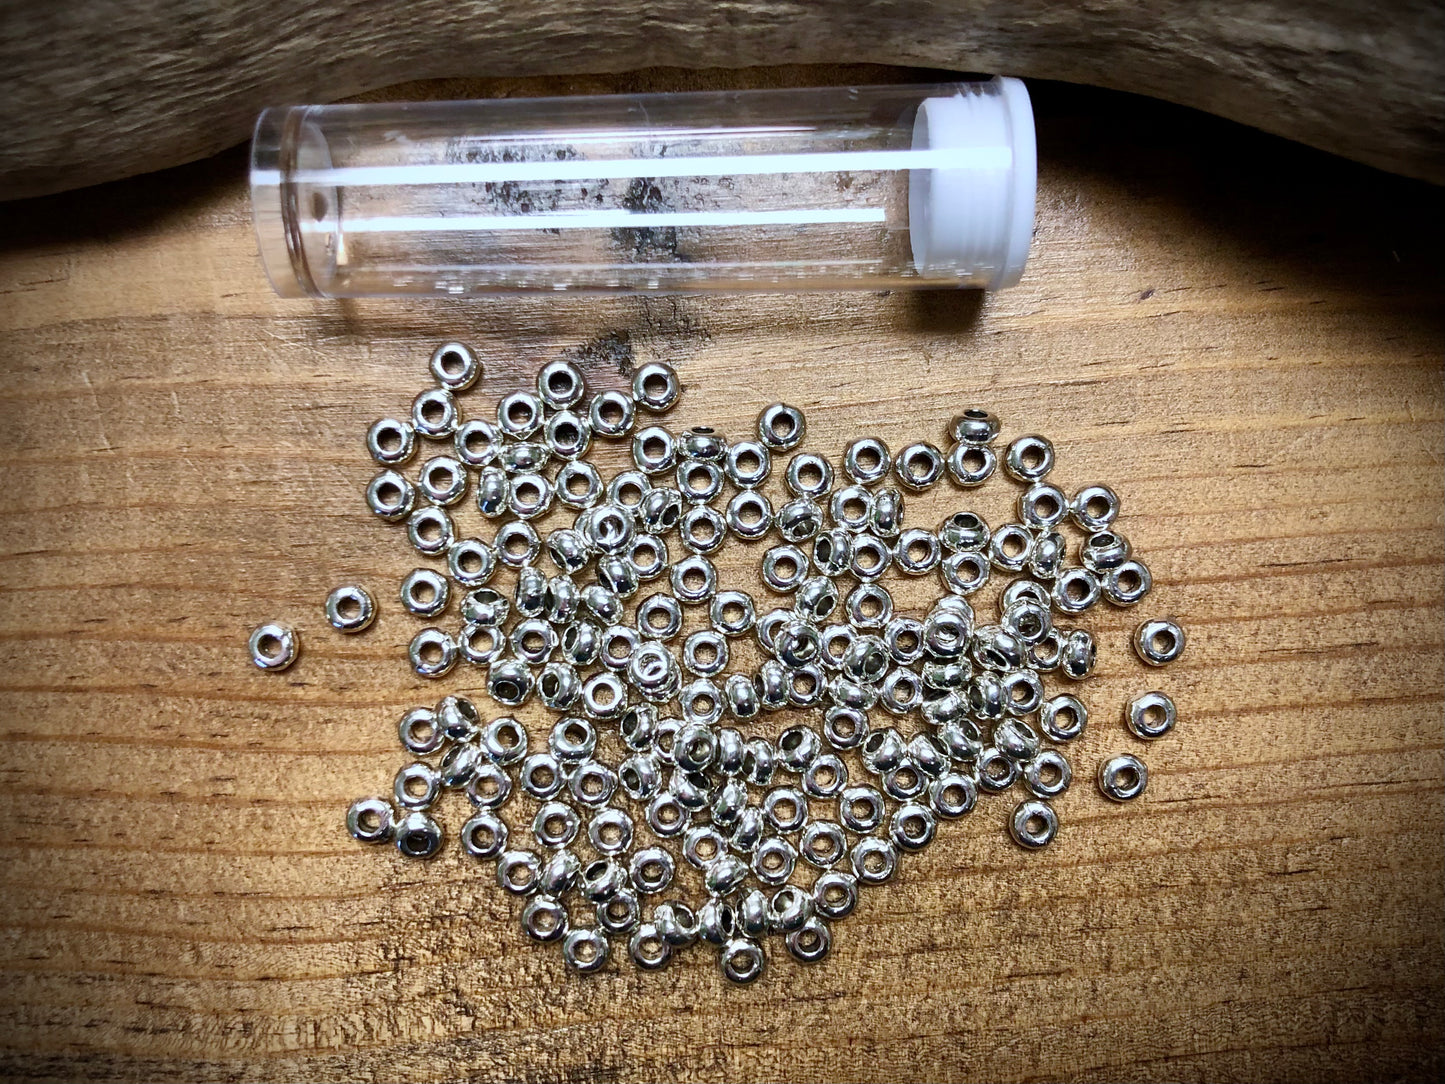 Pewter Spacers Set - 2mm x 4mm Donuts